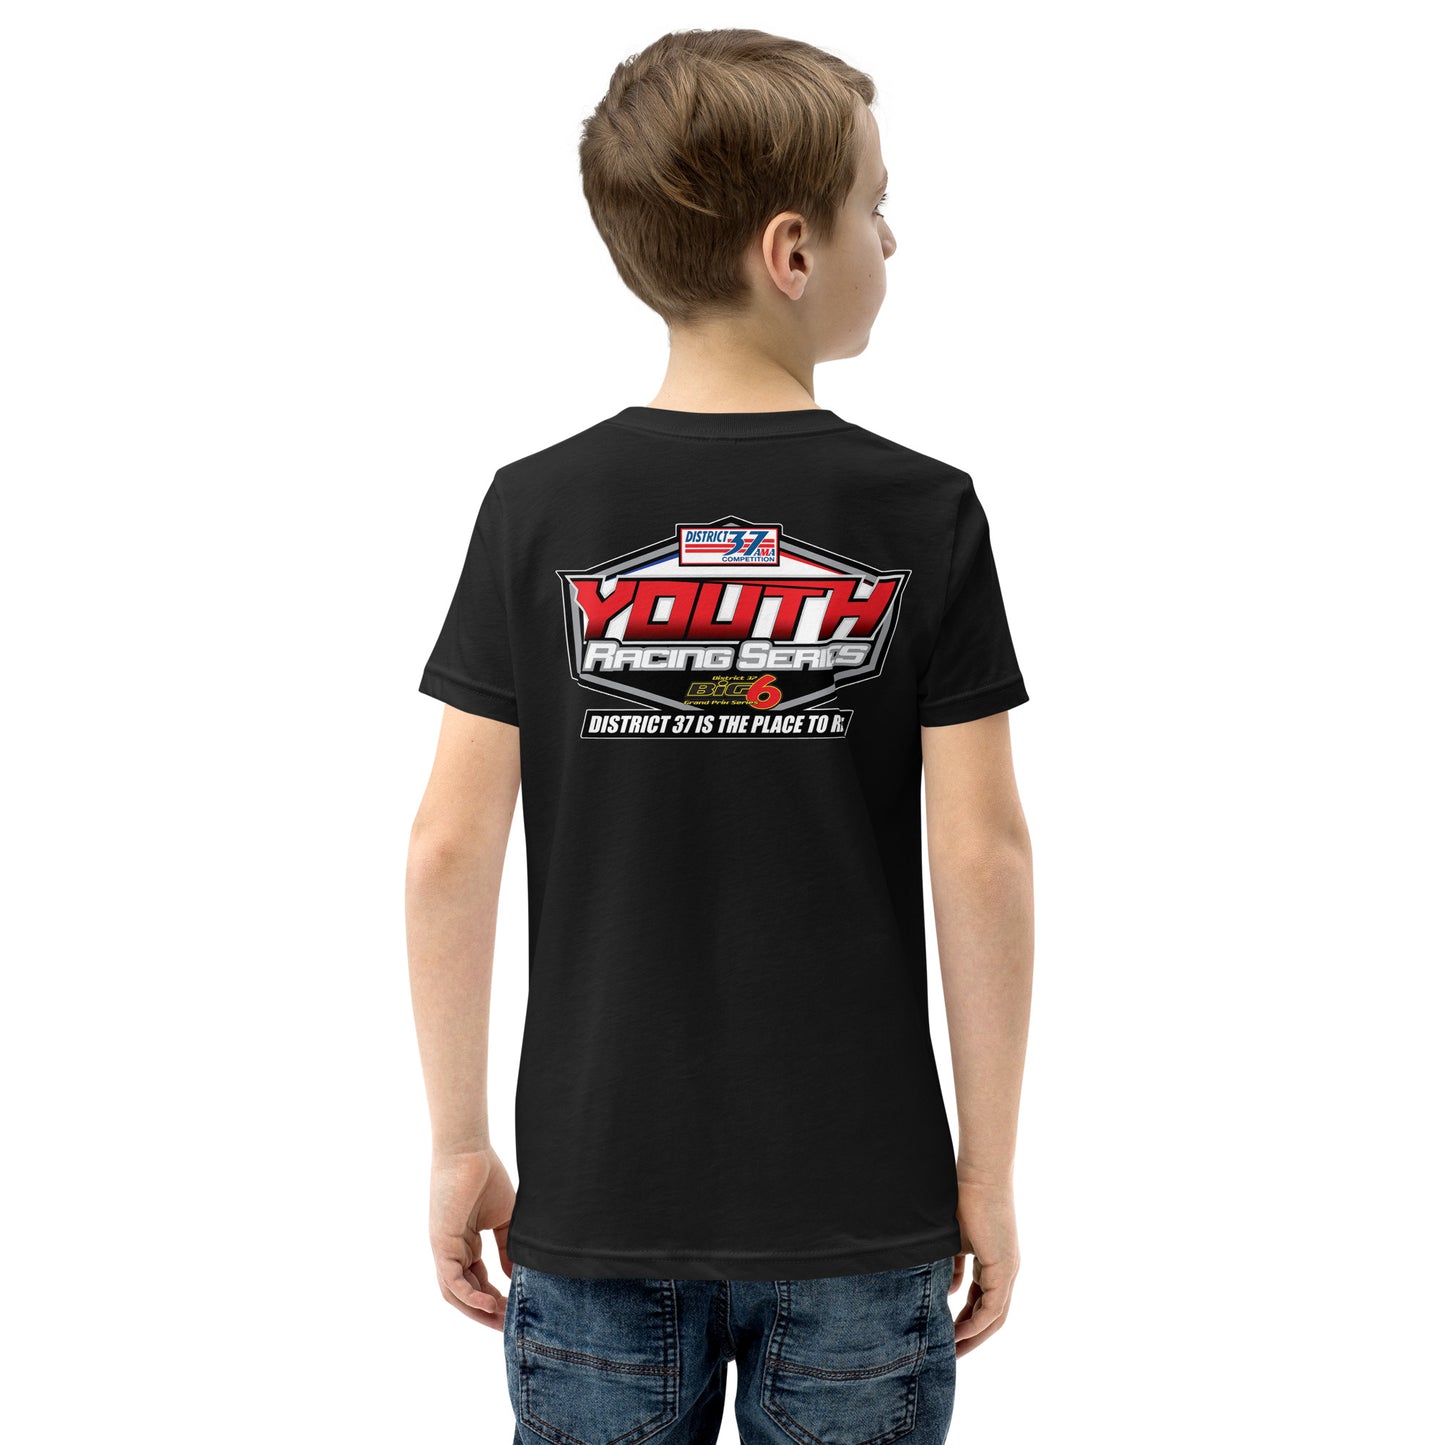 D37 Youth Series Shirt - Youth Size Shirt